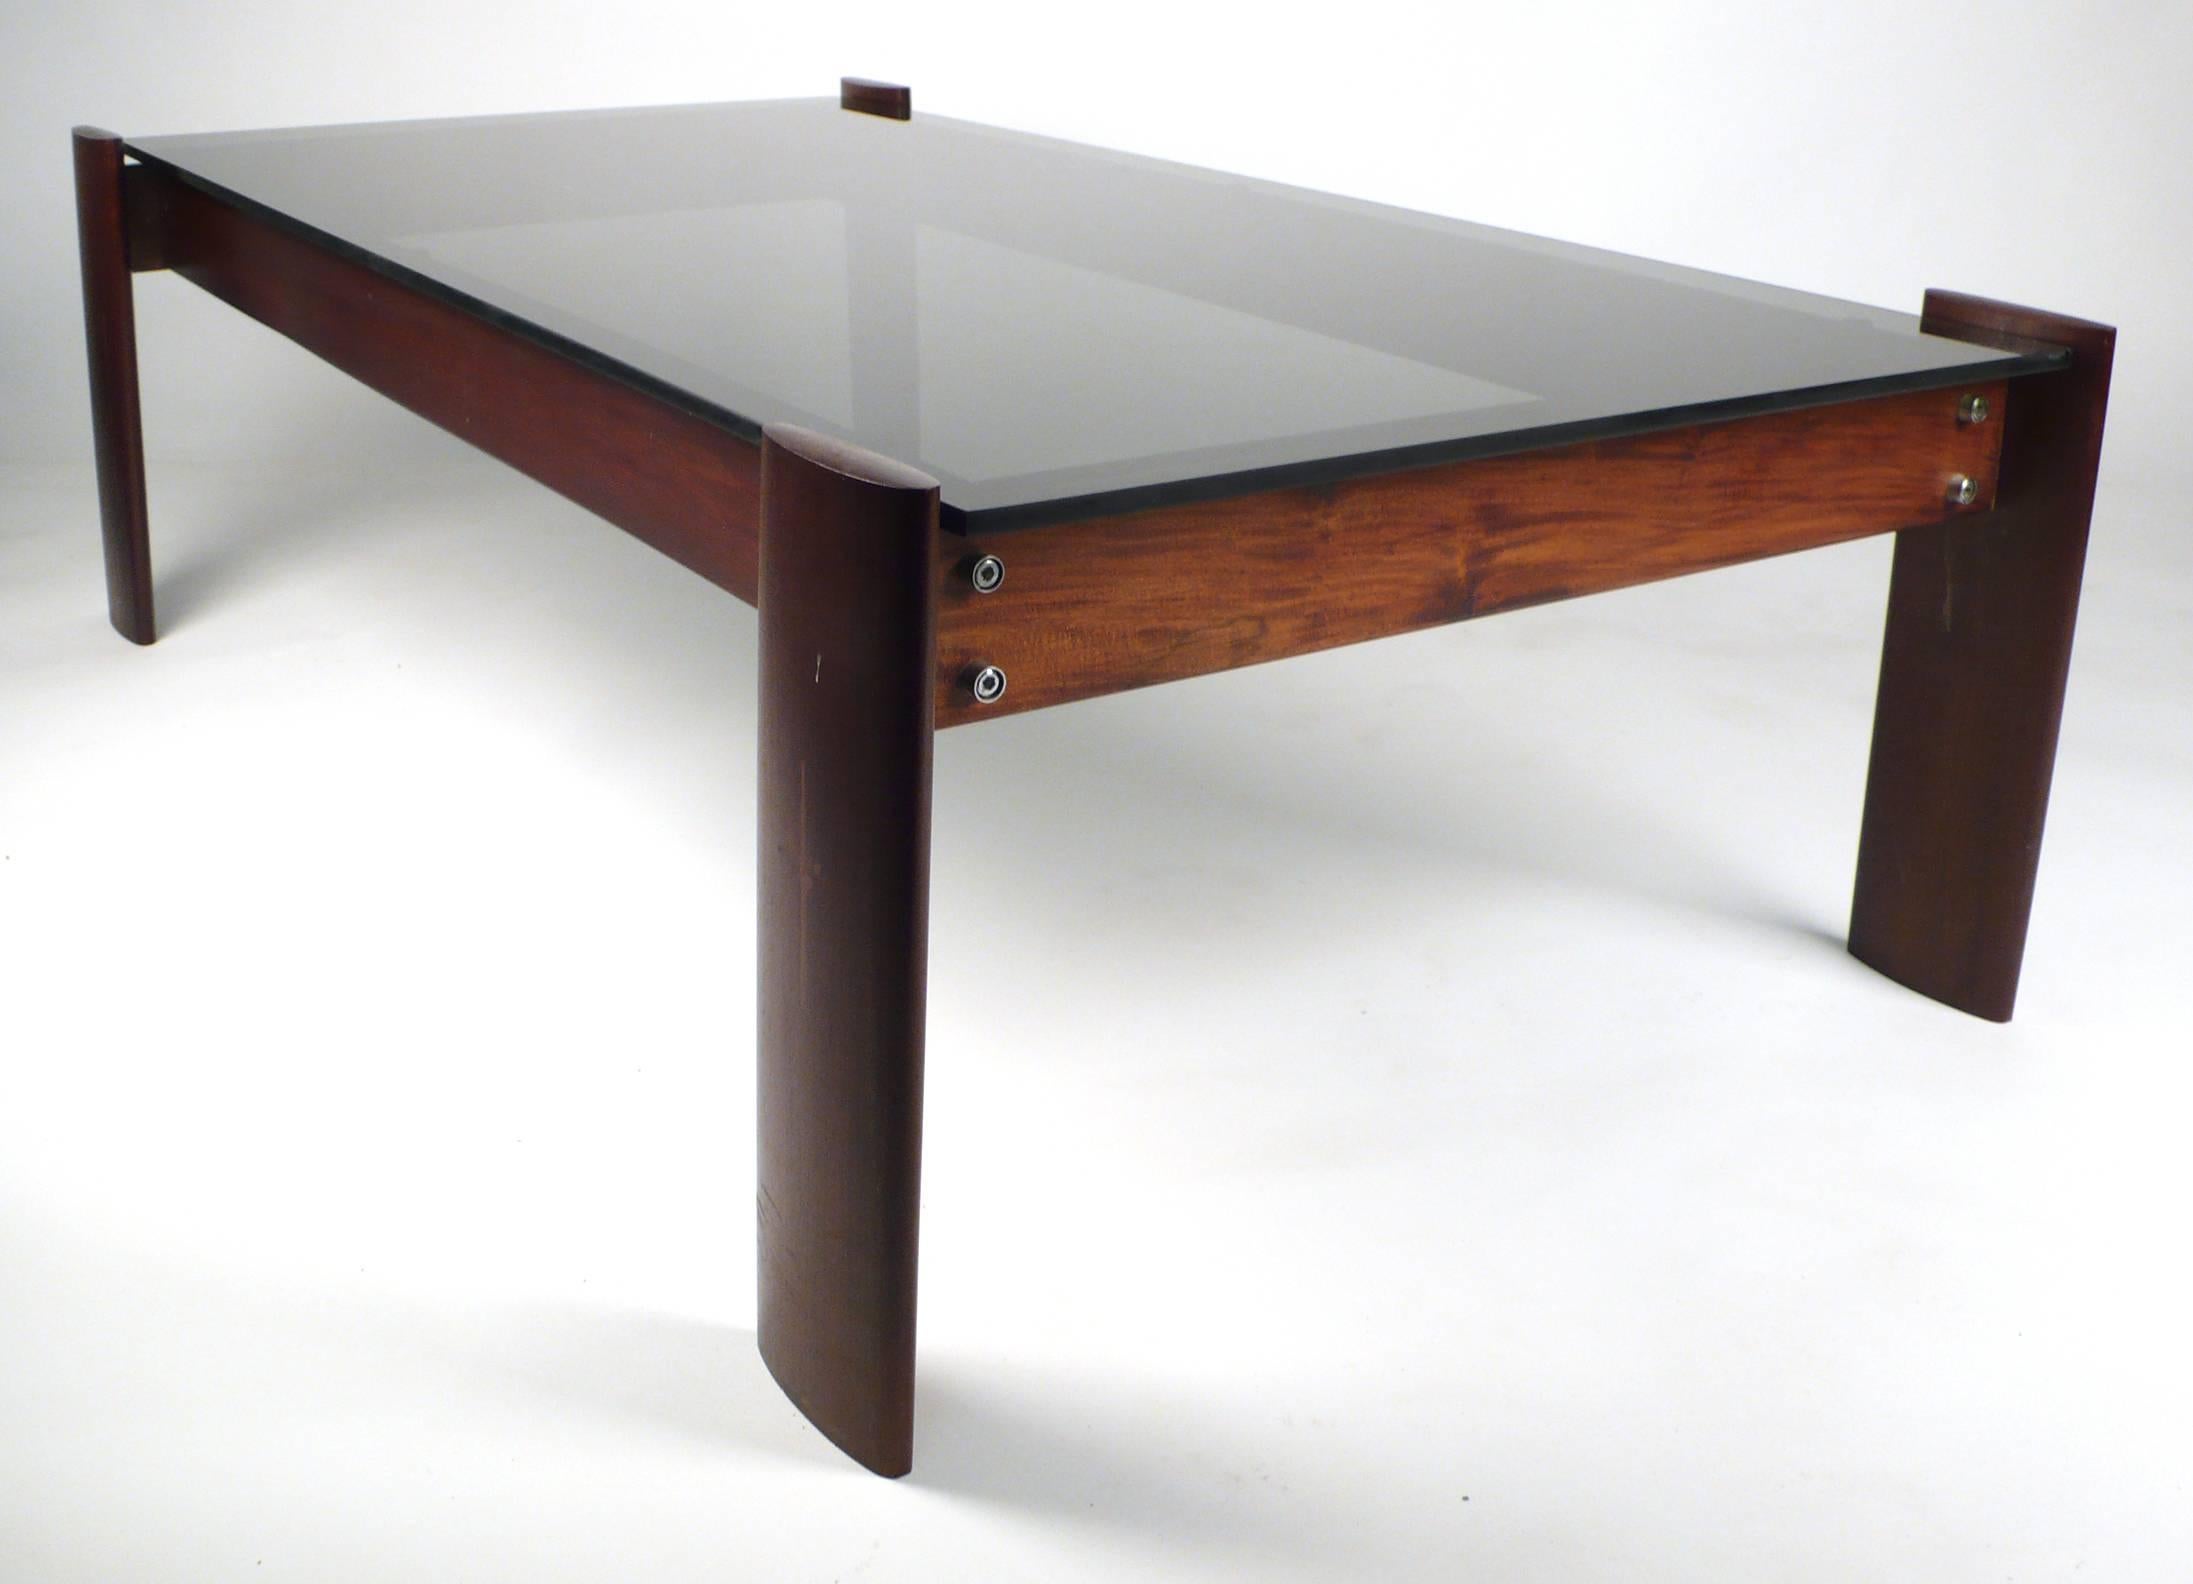 Percival Lafer coffee table in Jacaranda rosewood with original smoked glass top.